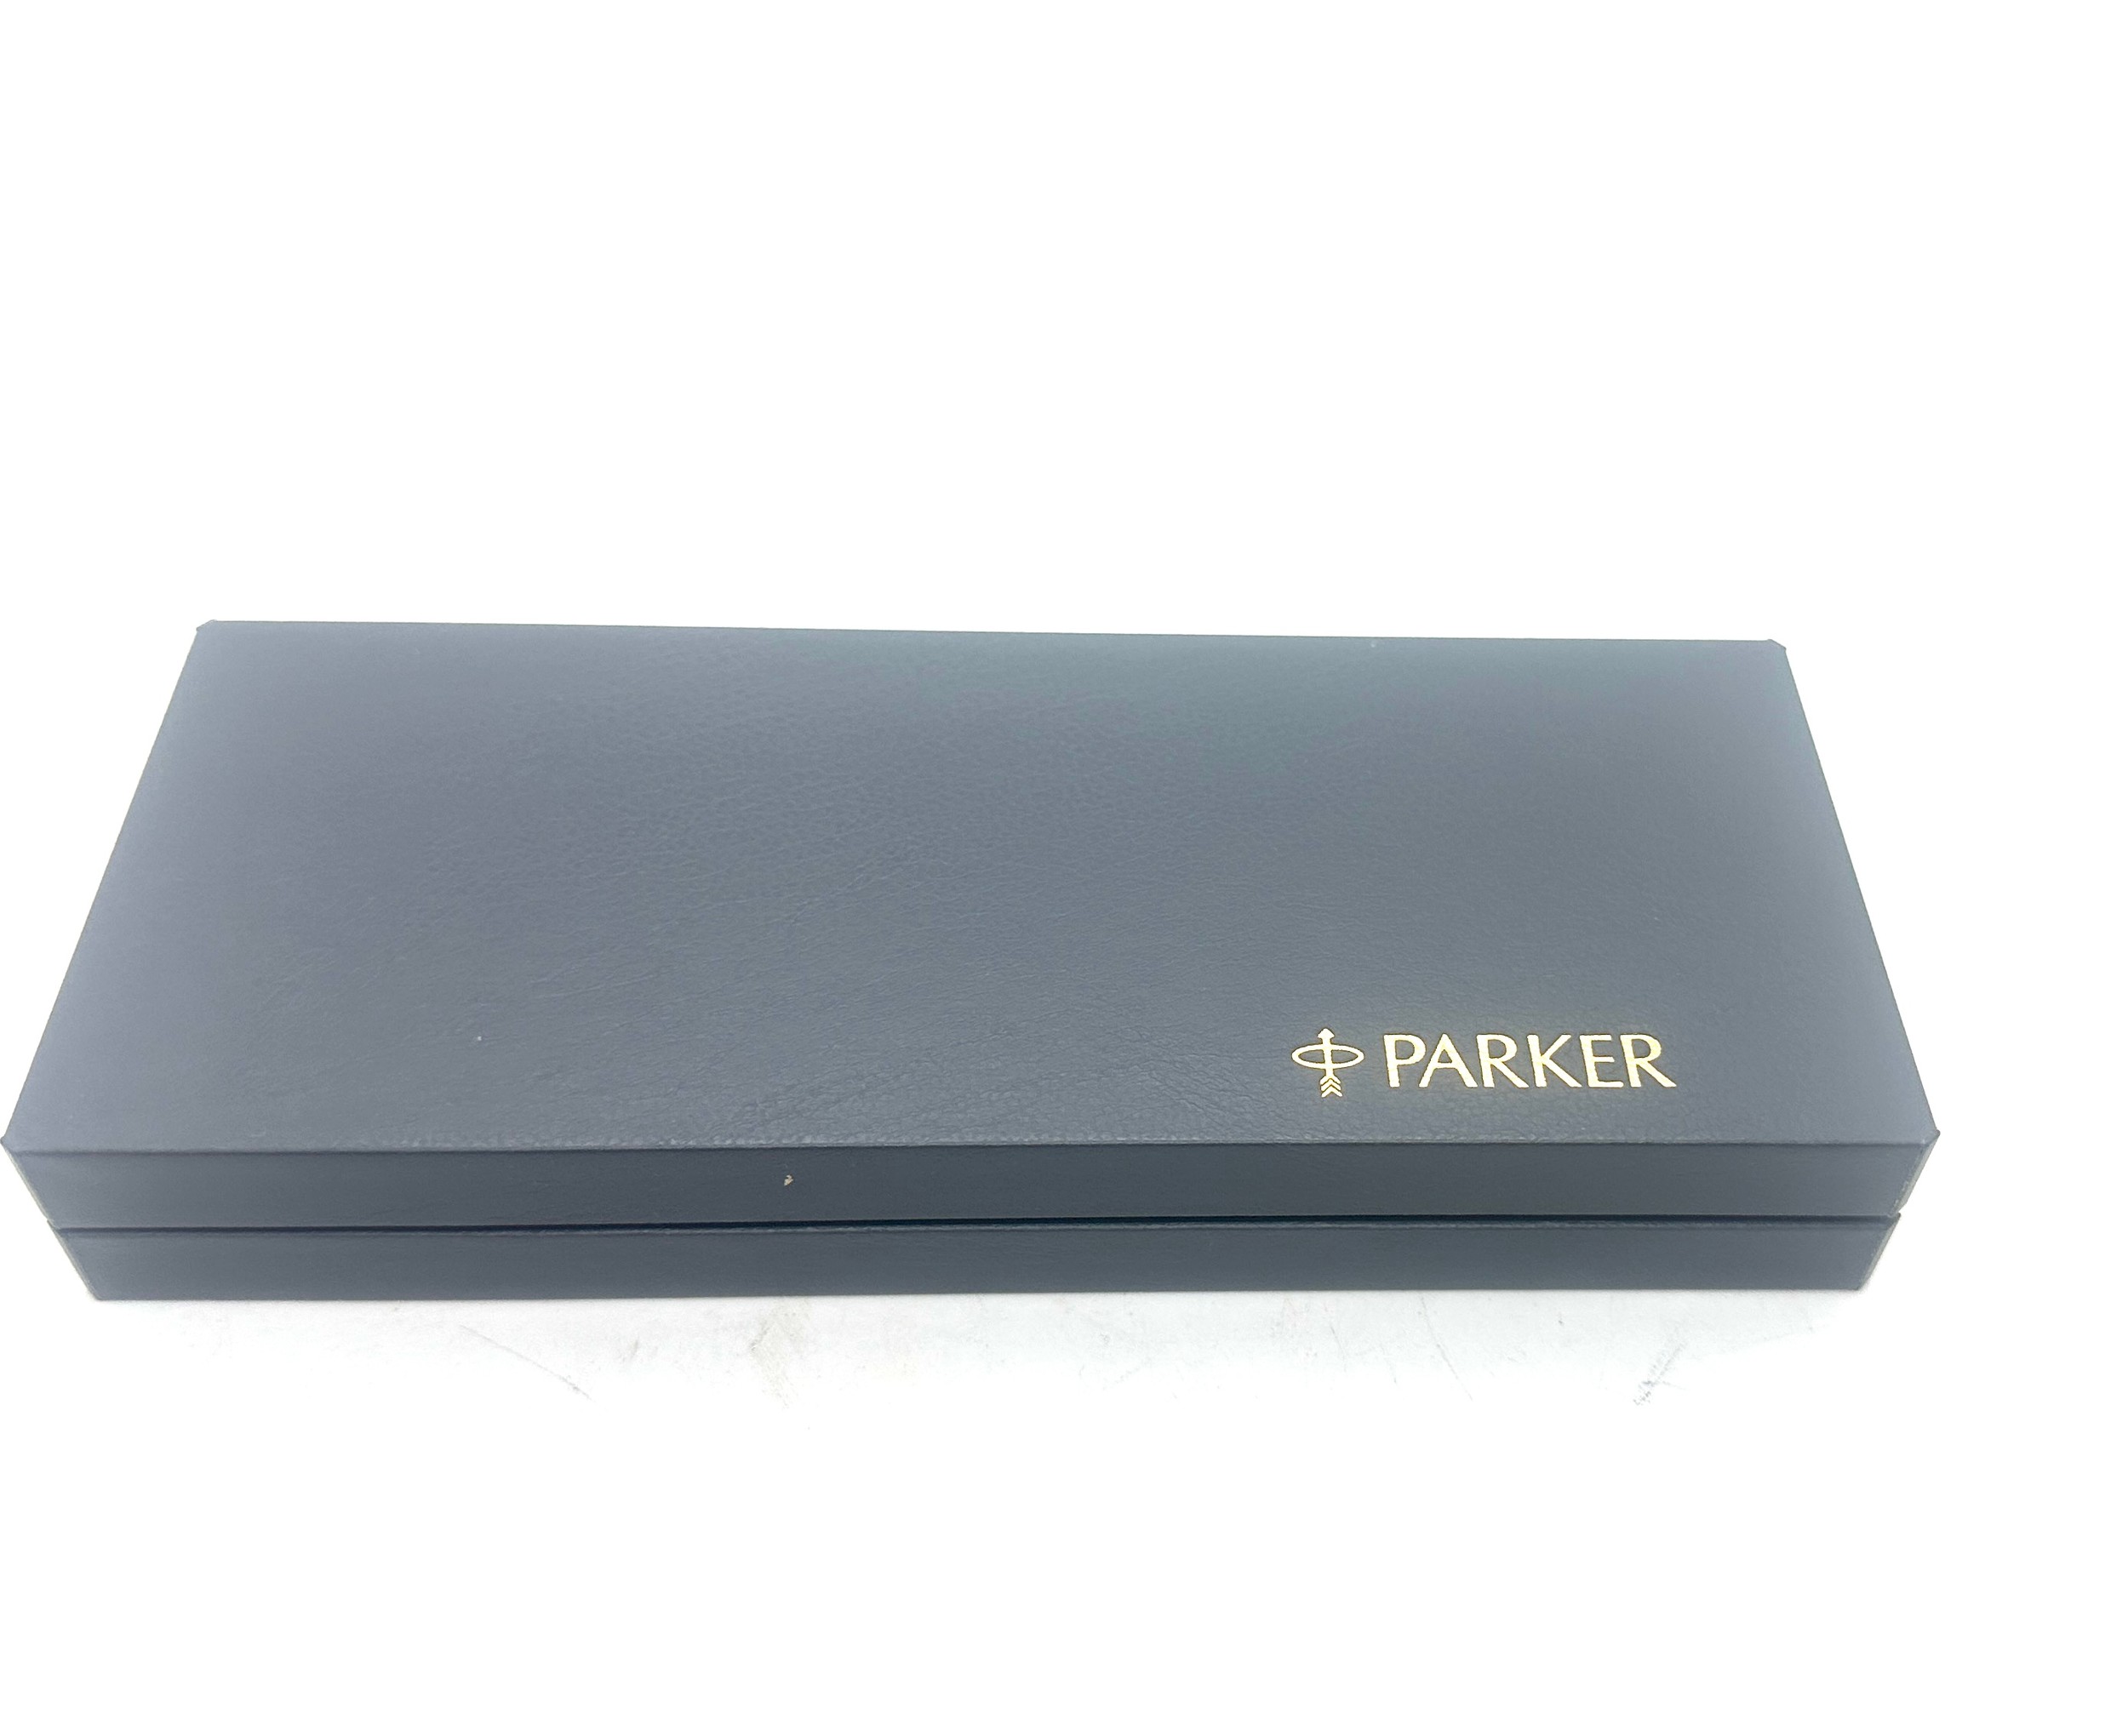 Boxed unused parker thuya 4173 with 14ct gold nib - Image 3 of 8